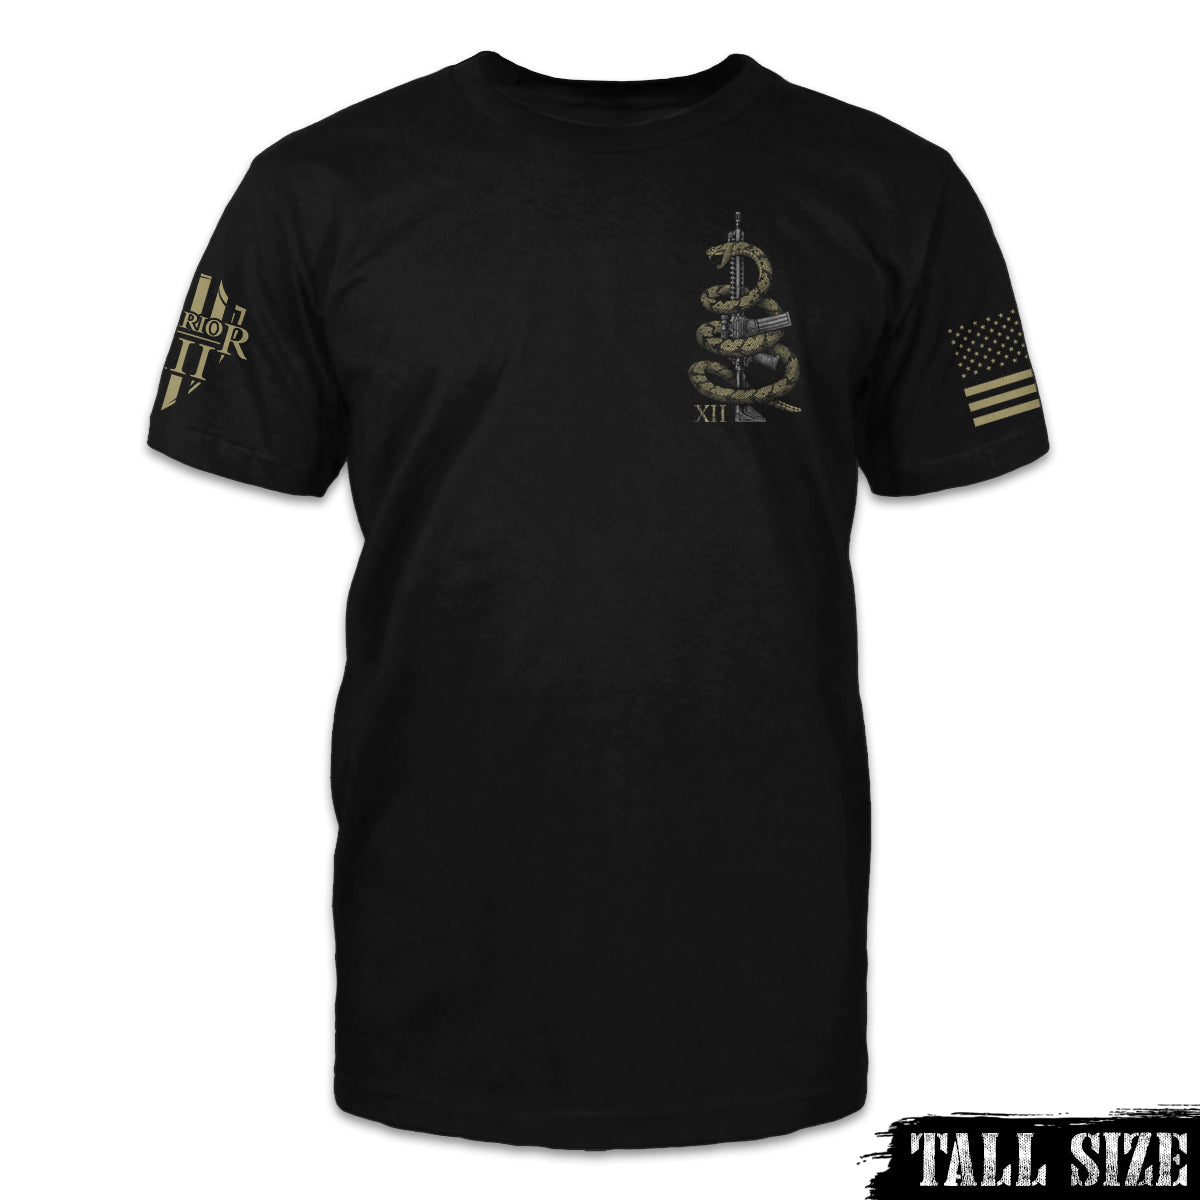 A black tall size shirt with a coiled rattlesnake on an AR15 printed on the front of the shirt.